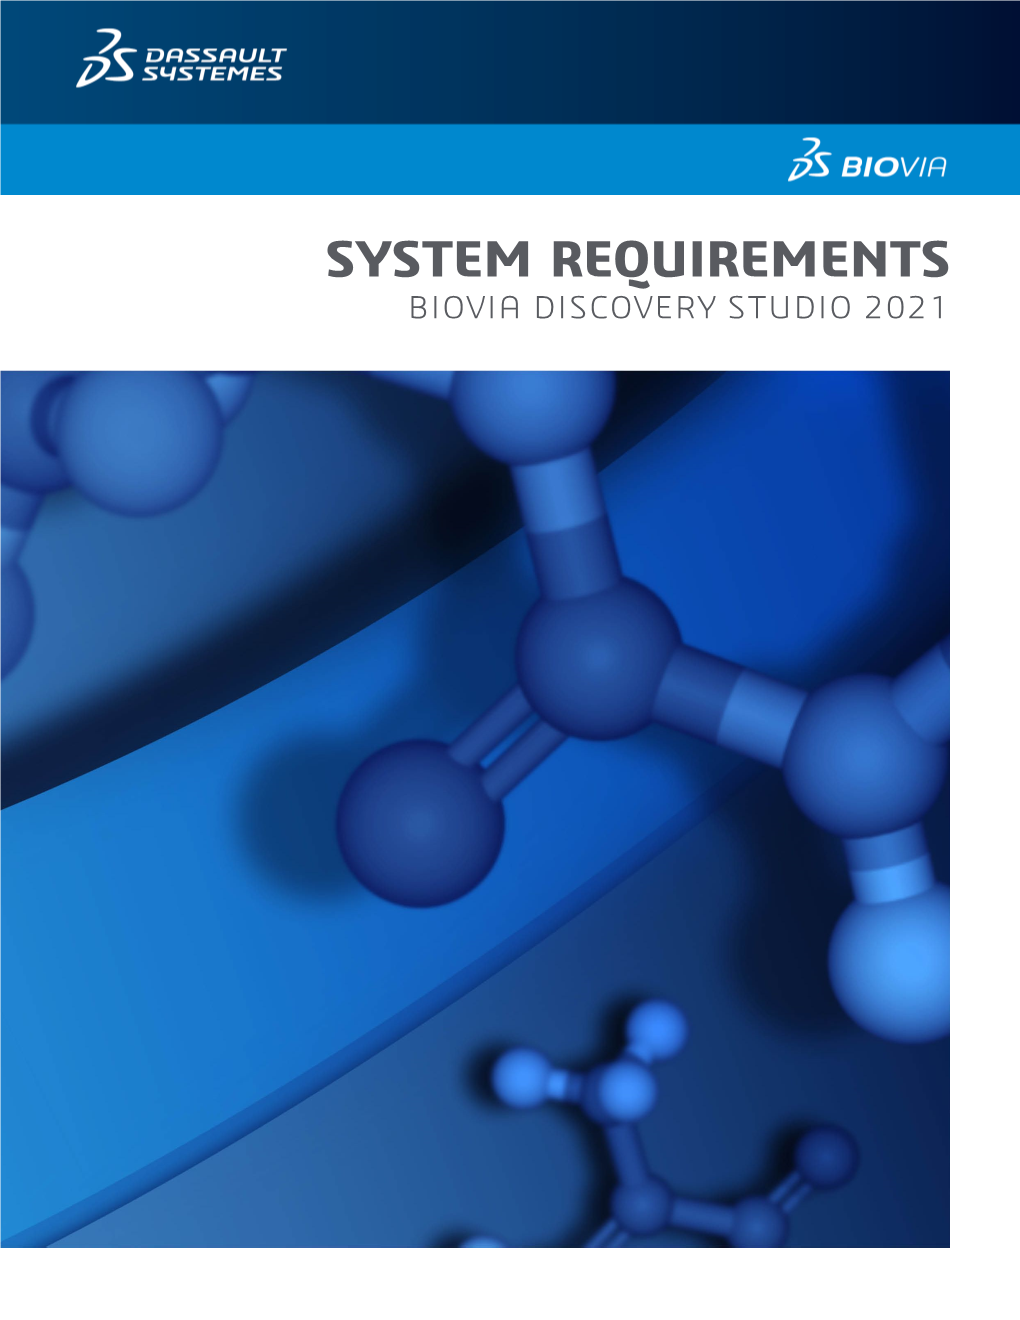 System Requirements for Discovery Studio